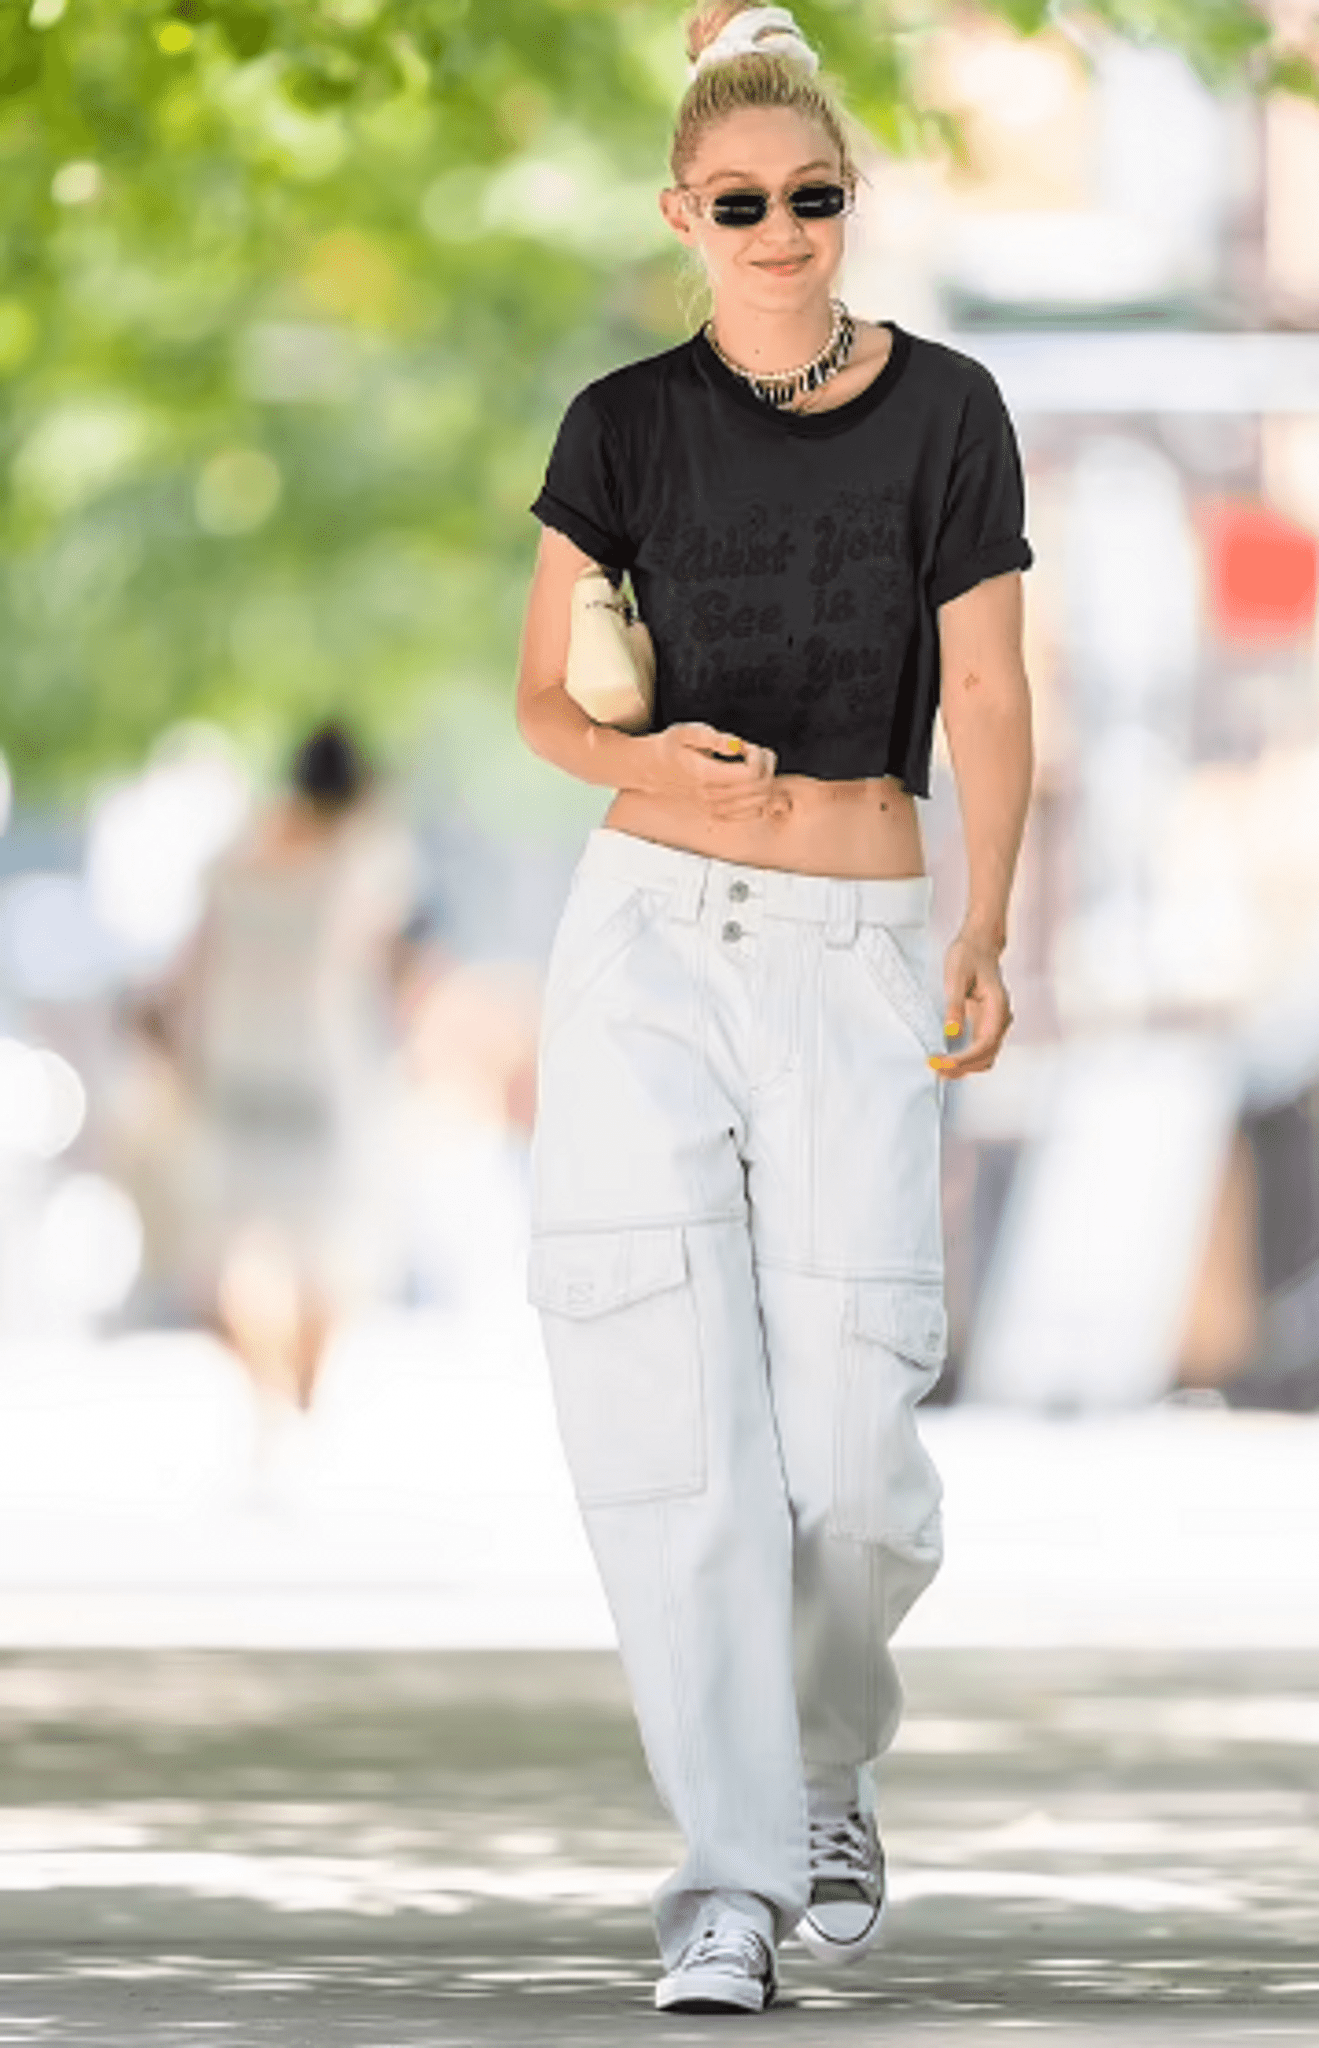 In A Low-Rise Pair Of White Slacks And A Black Crop Top, Gigi Hadid Appeared Beautiful And Carefree